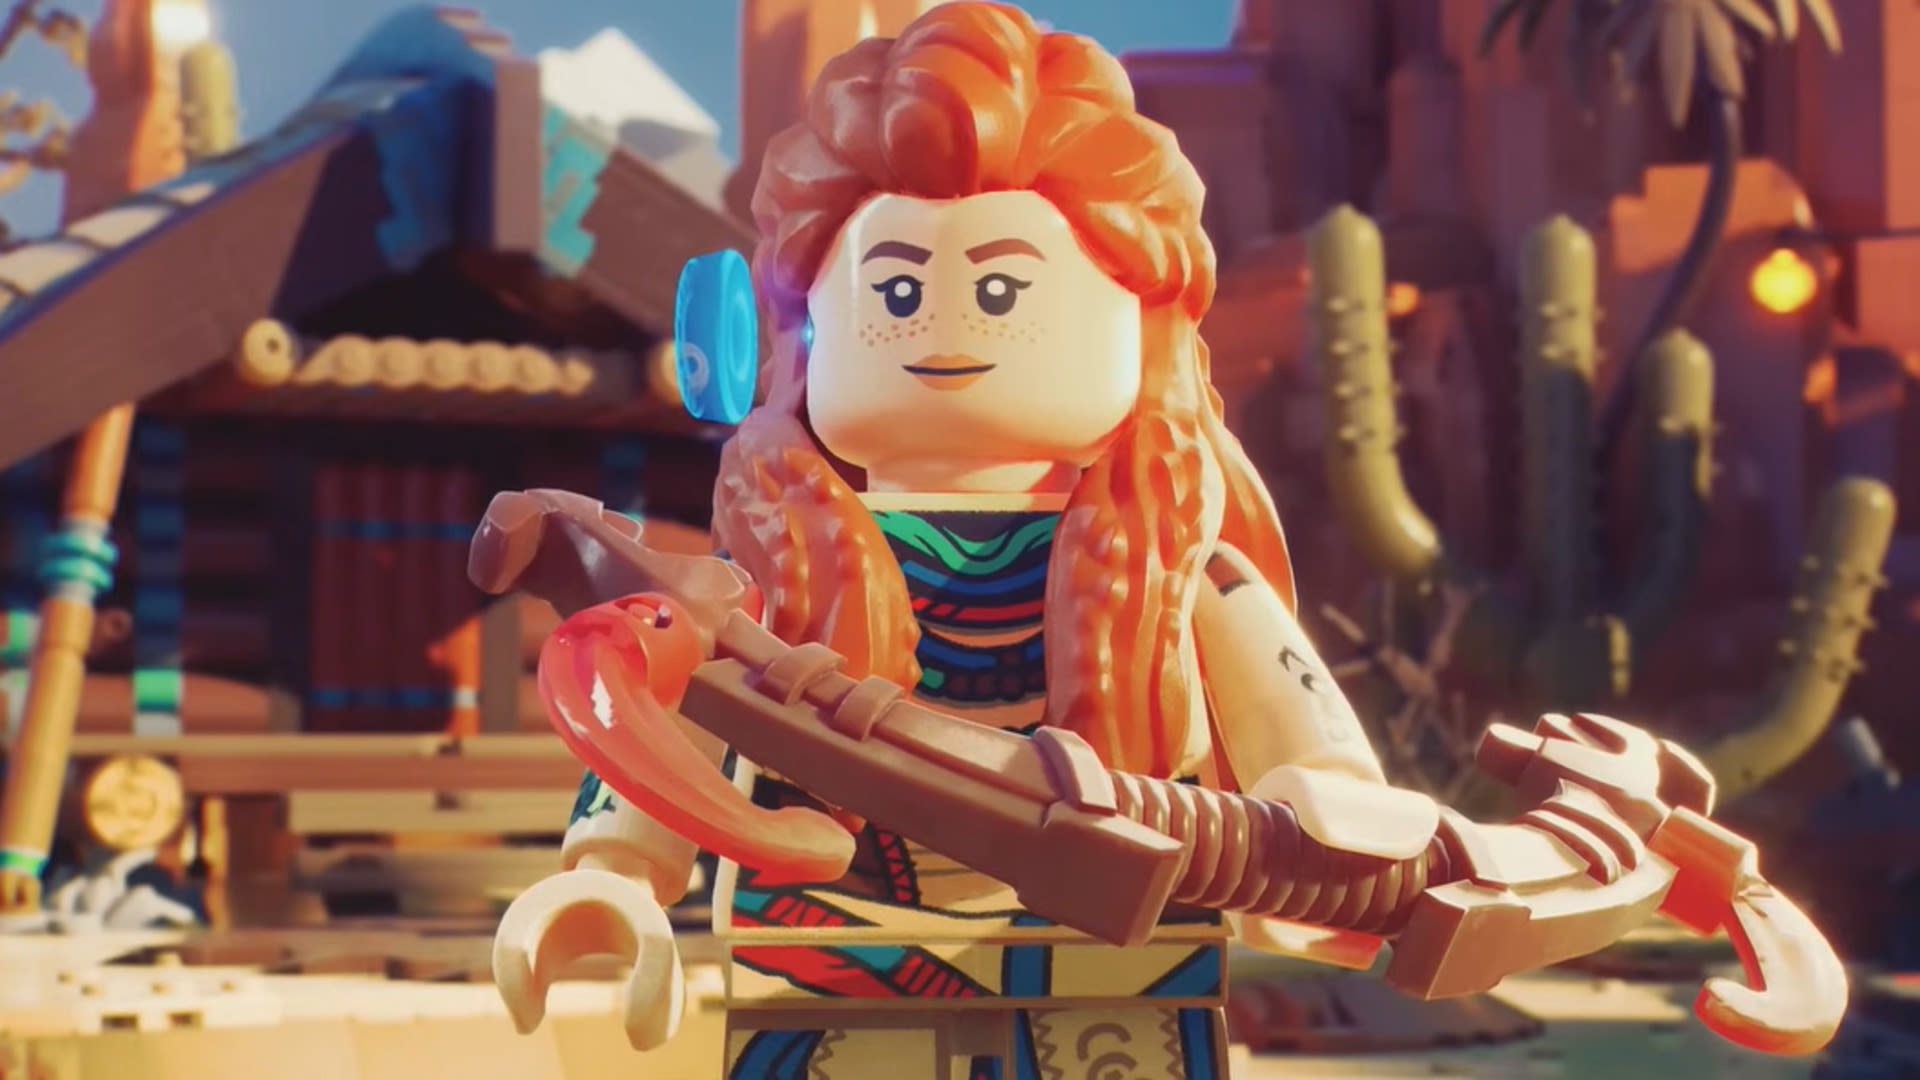 After Xbox made several of its games multiplatform, PlayStation is putting its own IP on Nintendo for the first time in 26 years with Lego Horizon Adventures